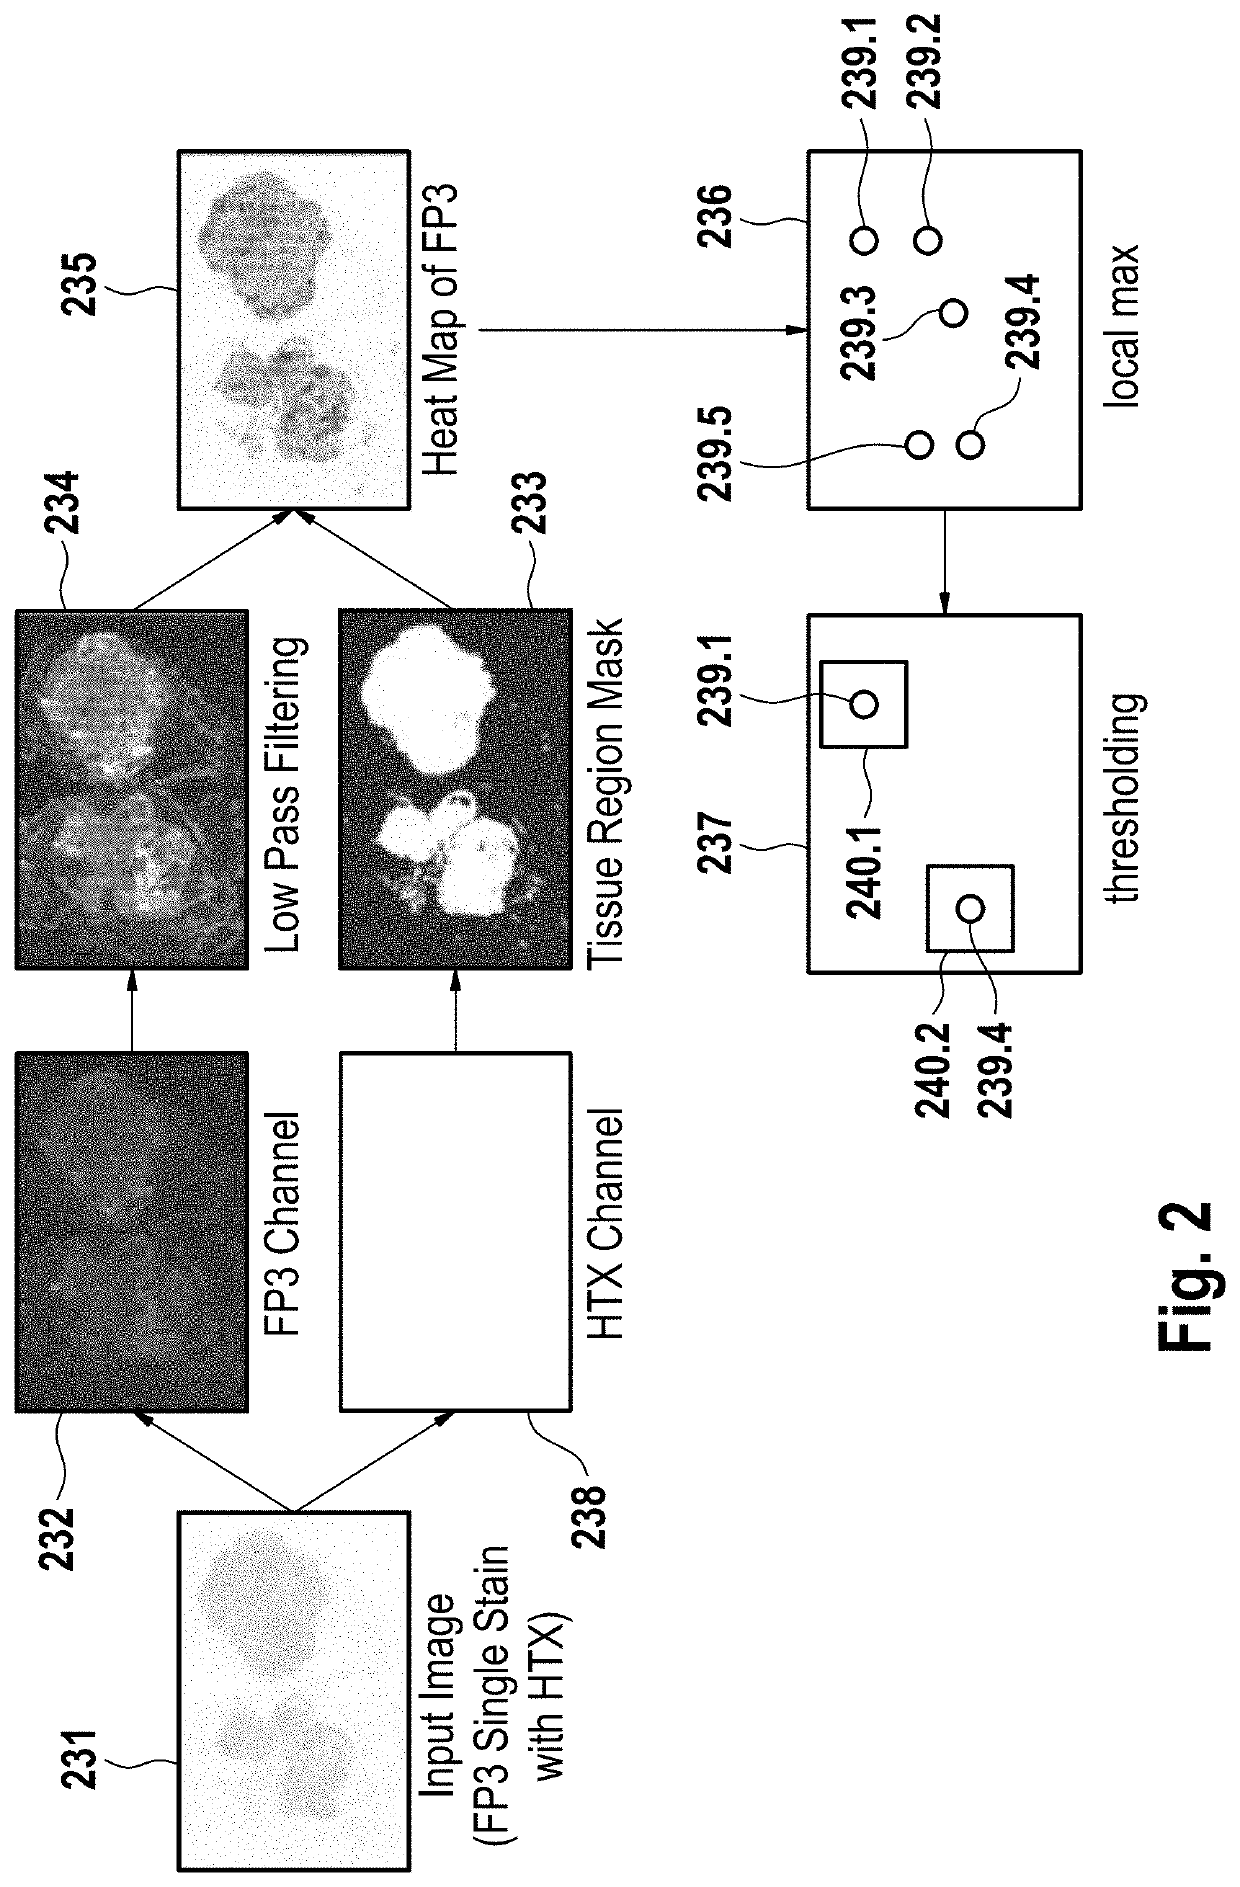 Image processing systems and methods for displaying multiple images of a biological specimen